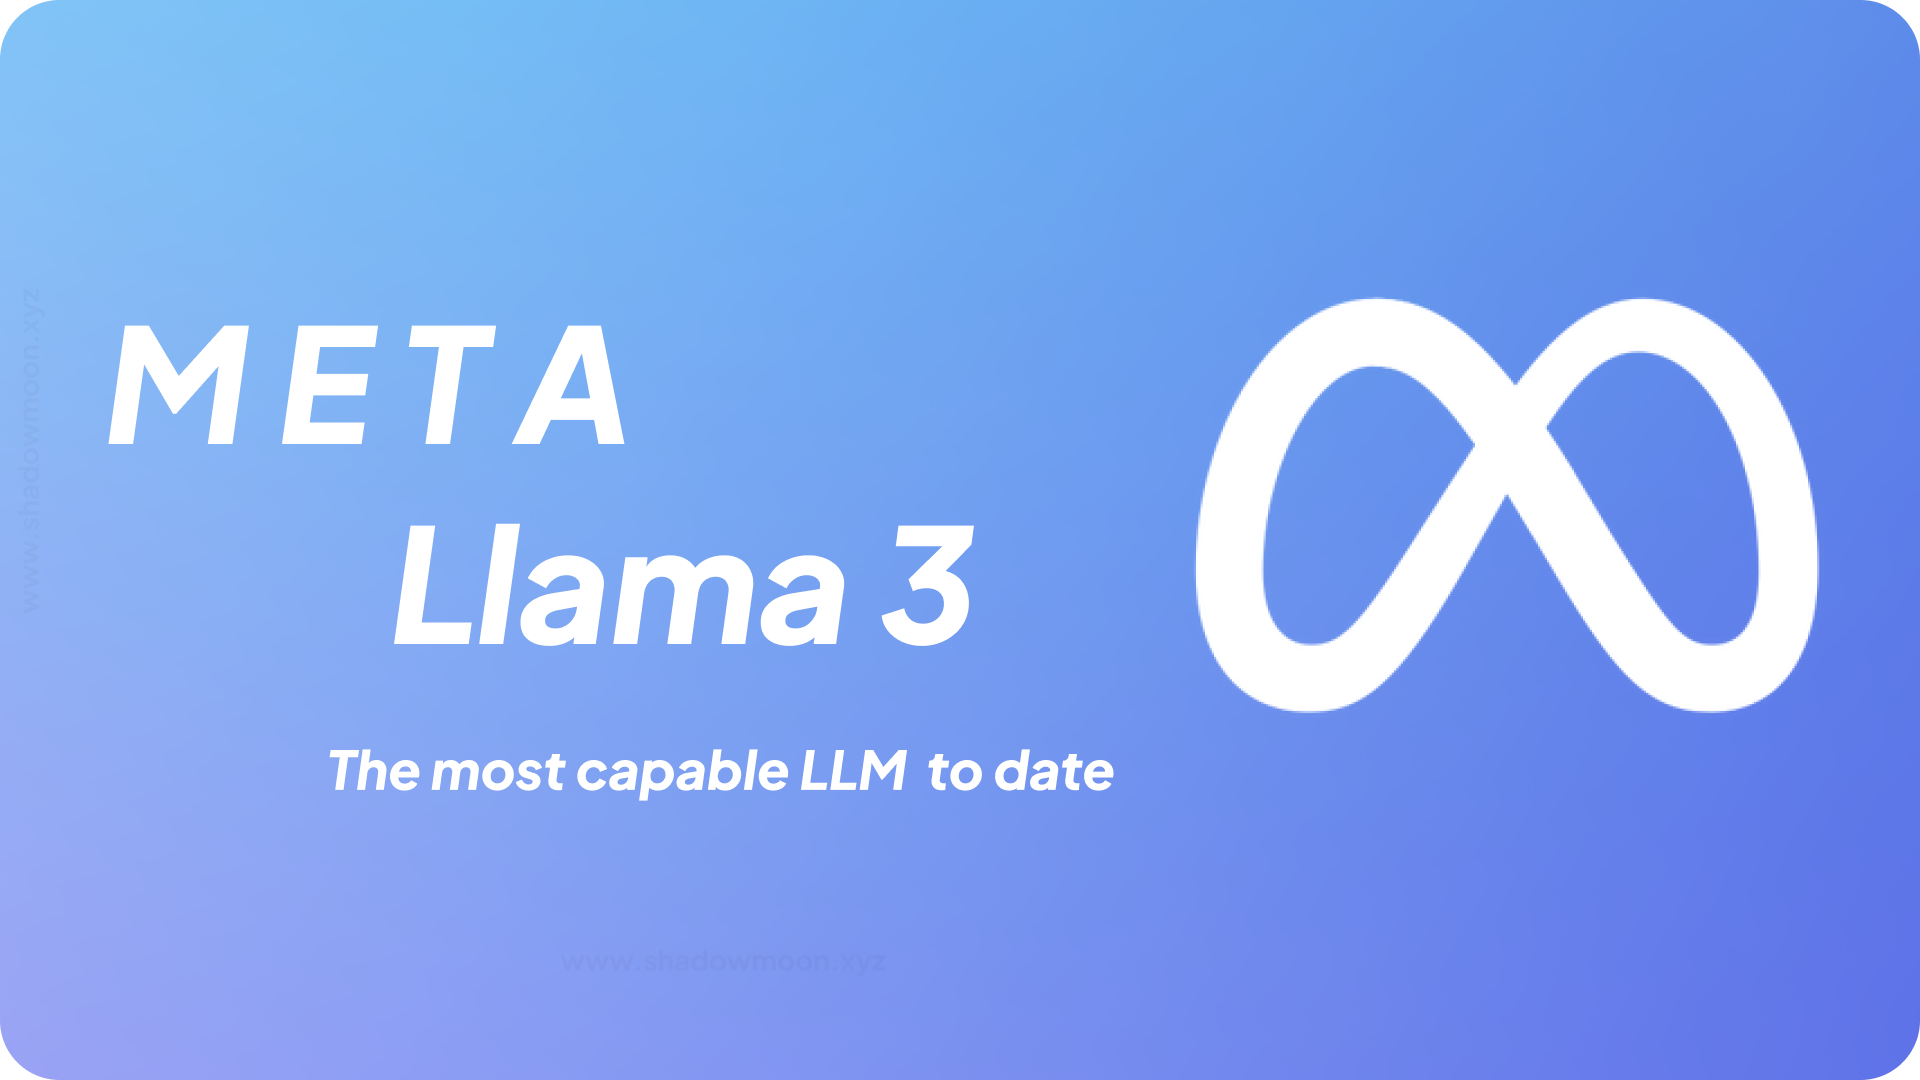 Everything you need to know about Meta's Llama 3